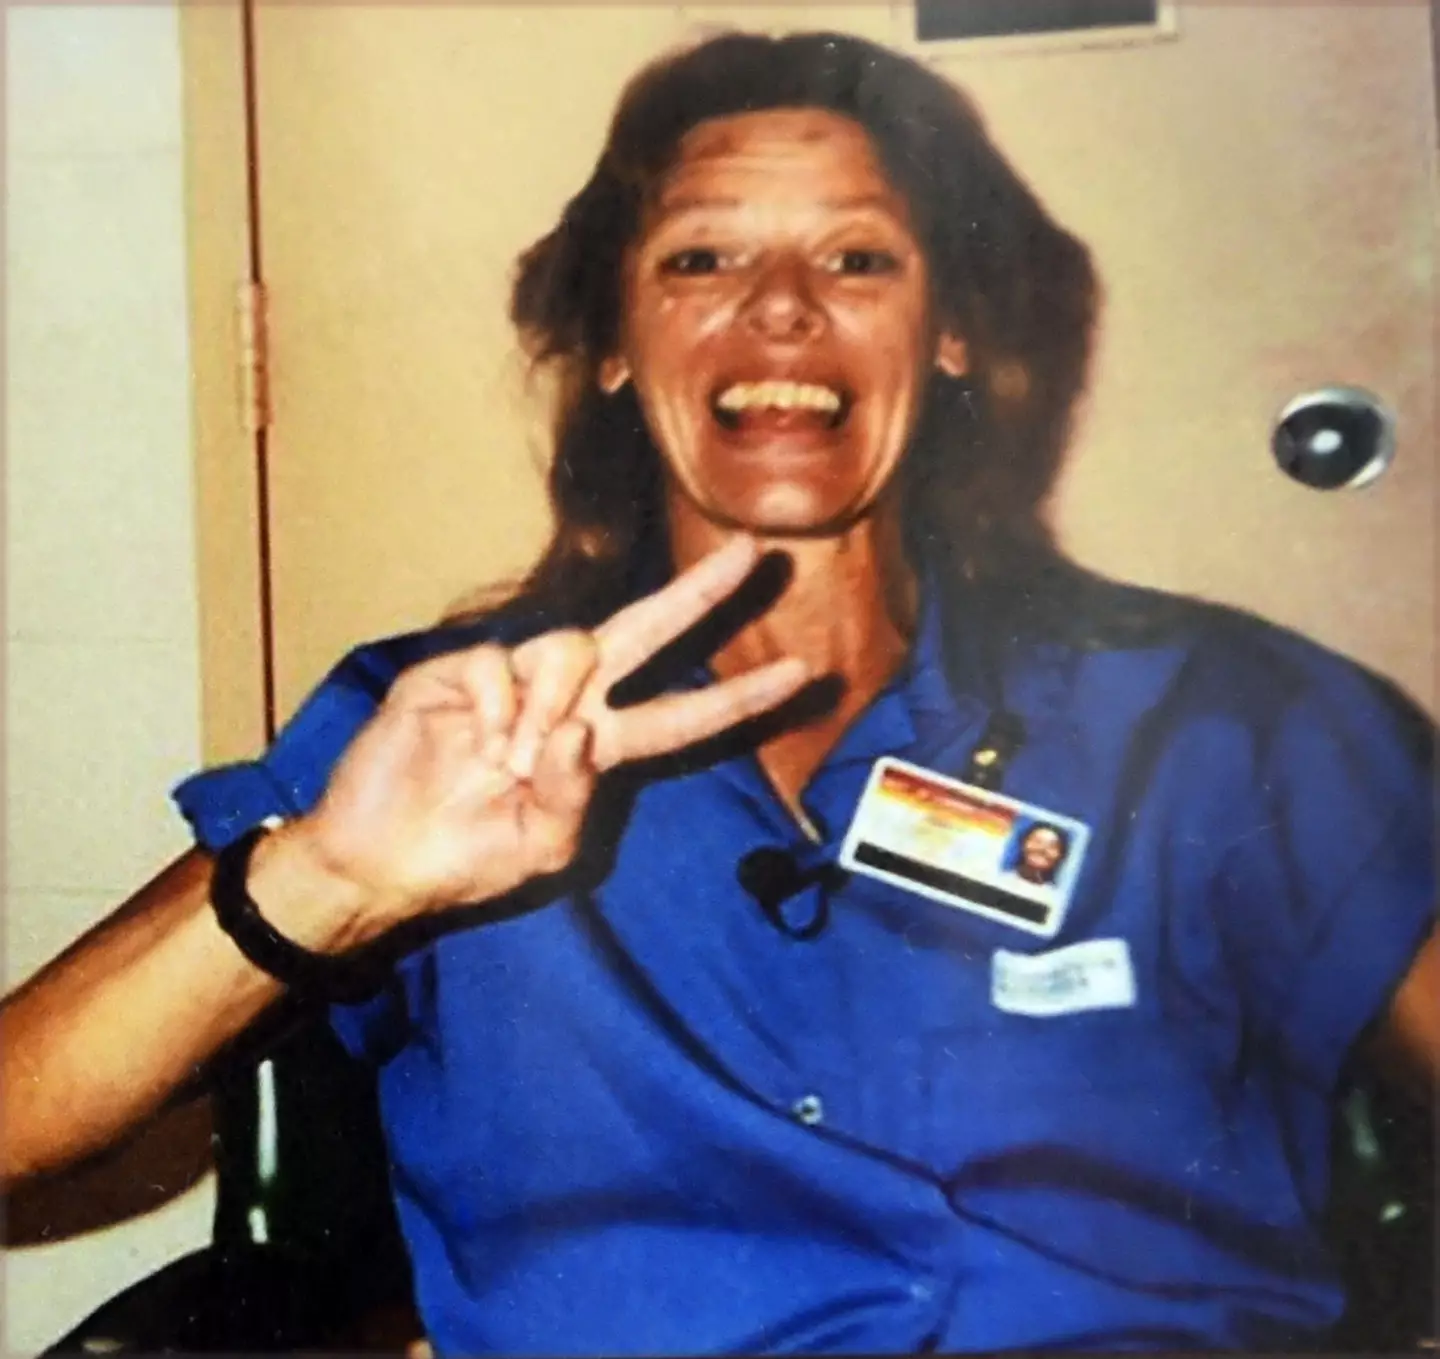 Serial killer Aileen Wuornos claimed she did nothing wrong.